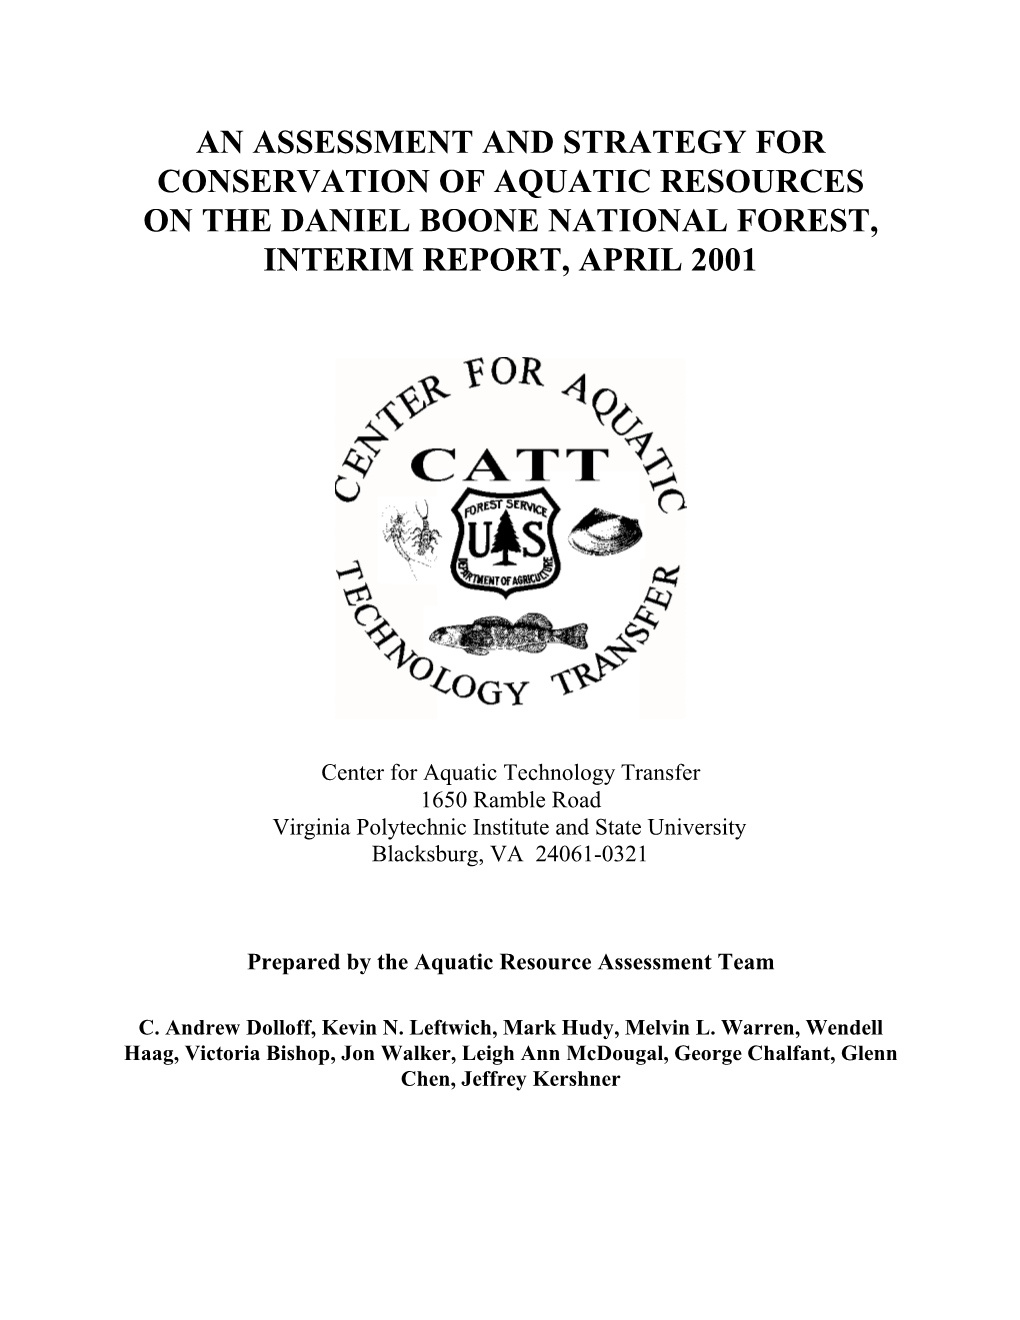 Assessment and Strategy for Conservation of Aquatic Resources on the Daniel Boone National Forest, Interim Report, April 2001